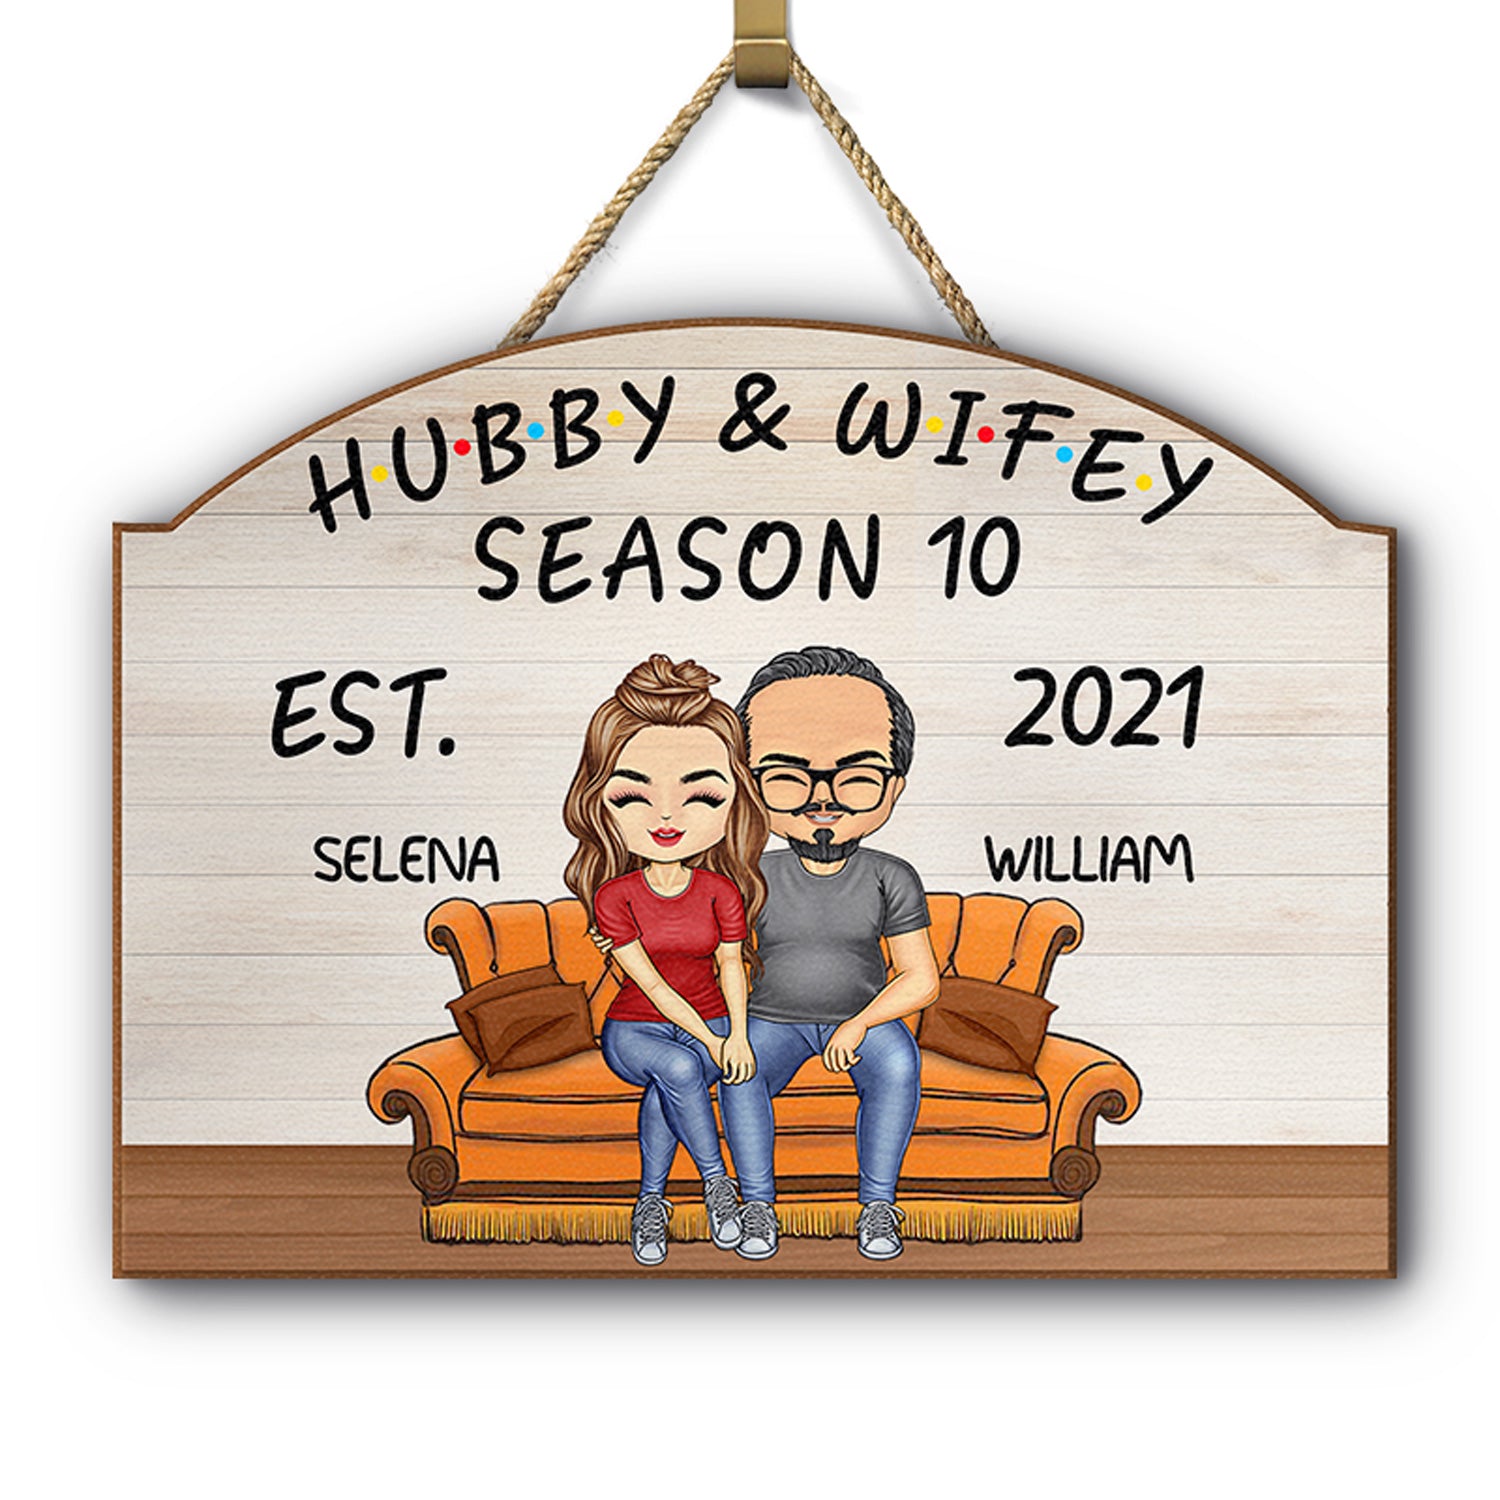 Hubby And Wifey Seasons - Birthday, Anniversary Decor Gift For Spouse, Lover, Husband, Wife, Boyfriend, Girlfriend, Couple - Personalized Custom Shaped Wood Sign